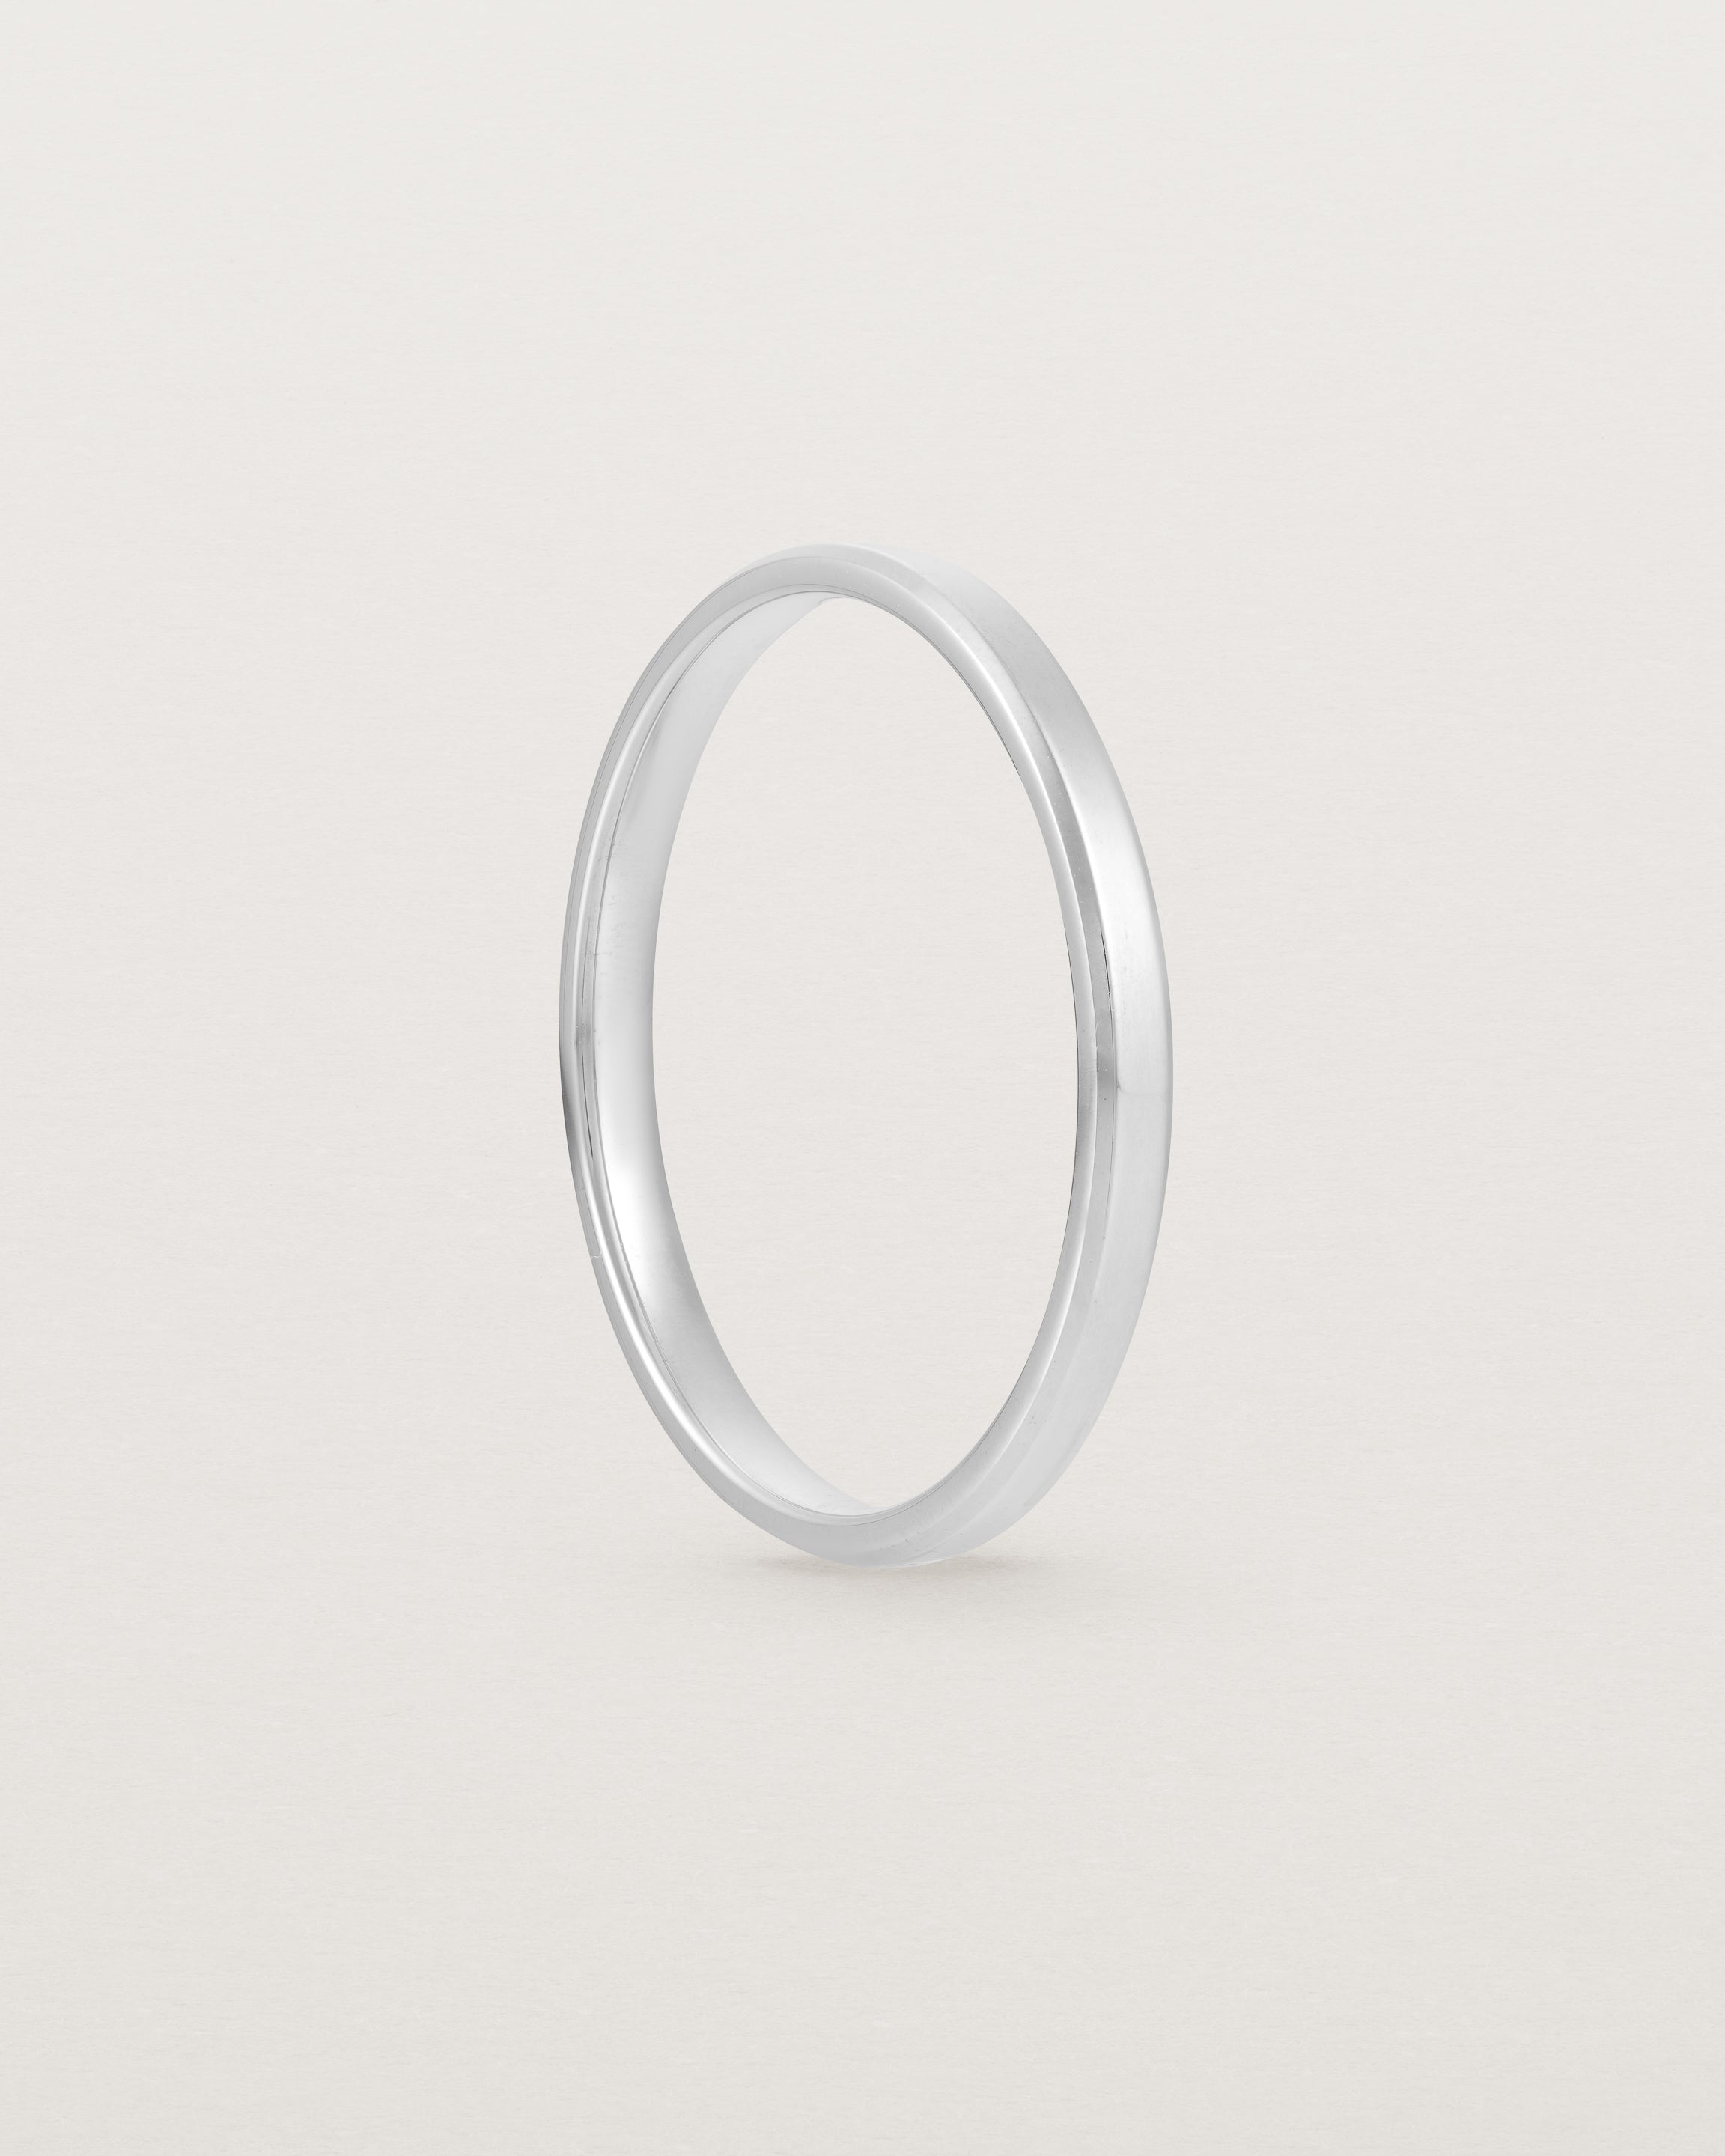 2mm white gold wedding band with a chamfered edge